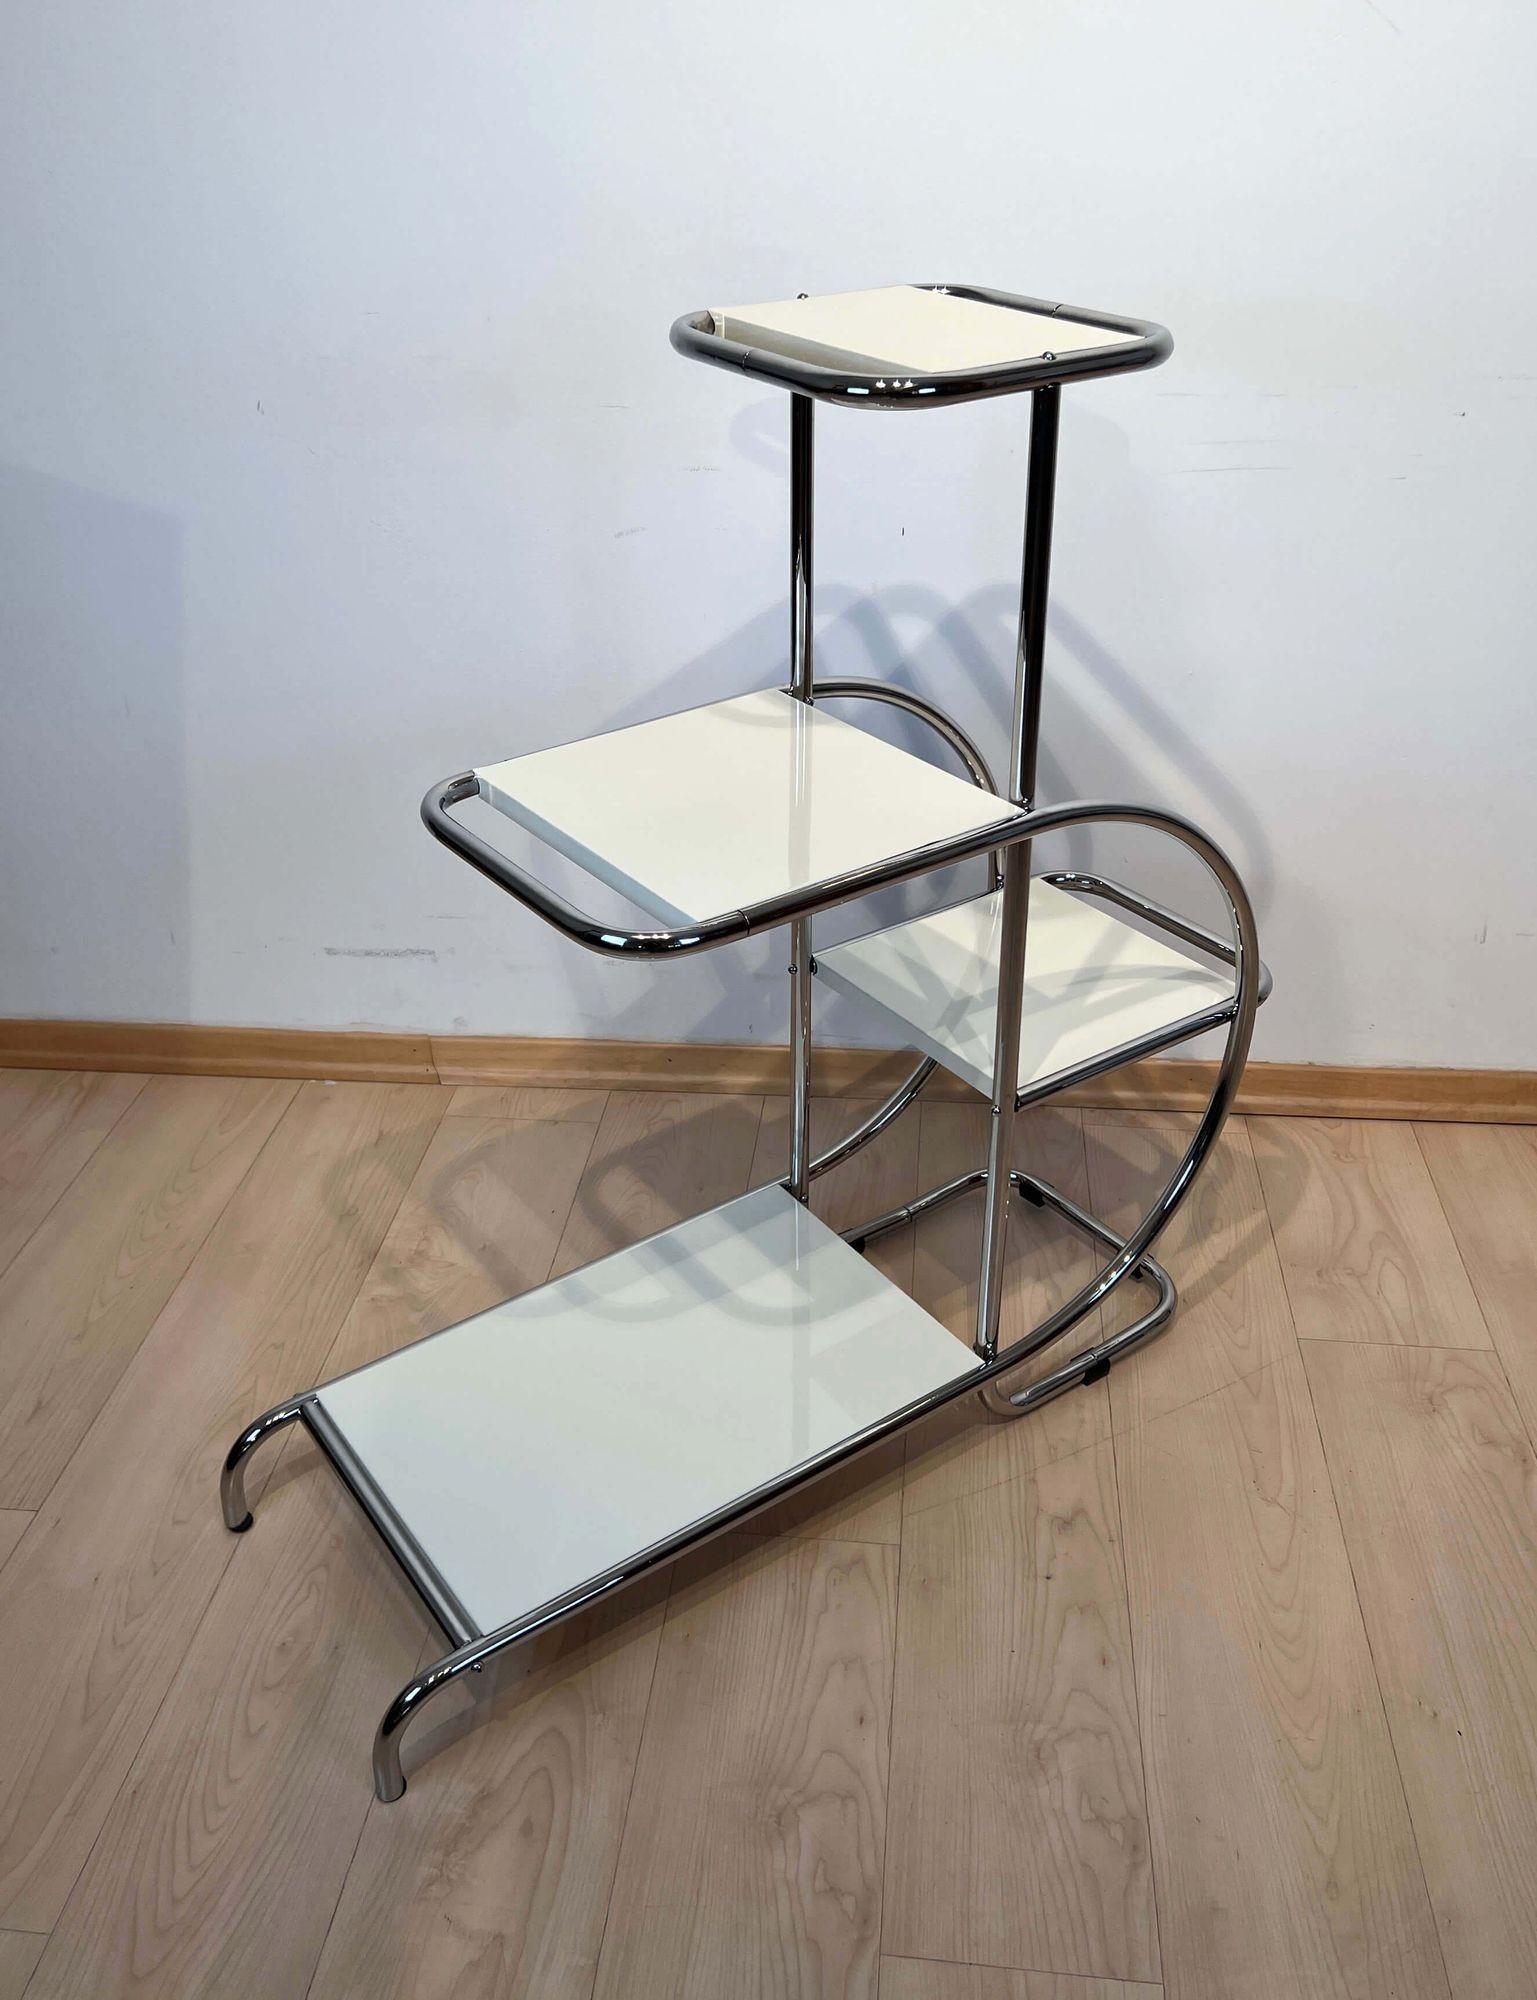 Bauhaus Steeltube Etagere, Creme-White Lacquer, Nickel Plate, Germany, 1930s For Sale 15